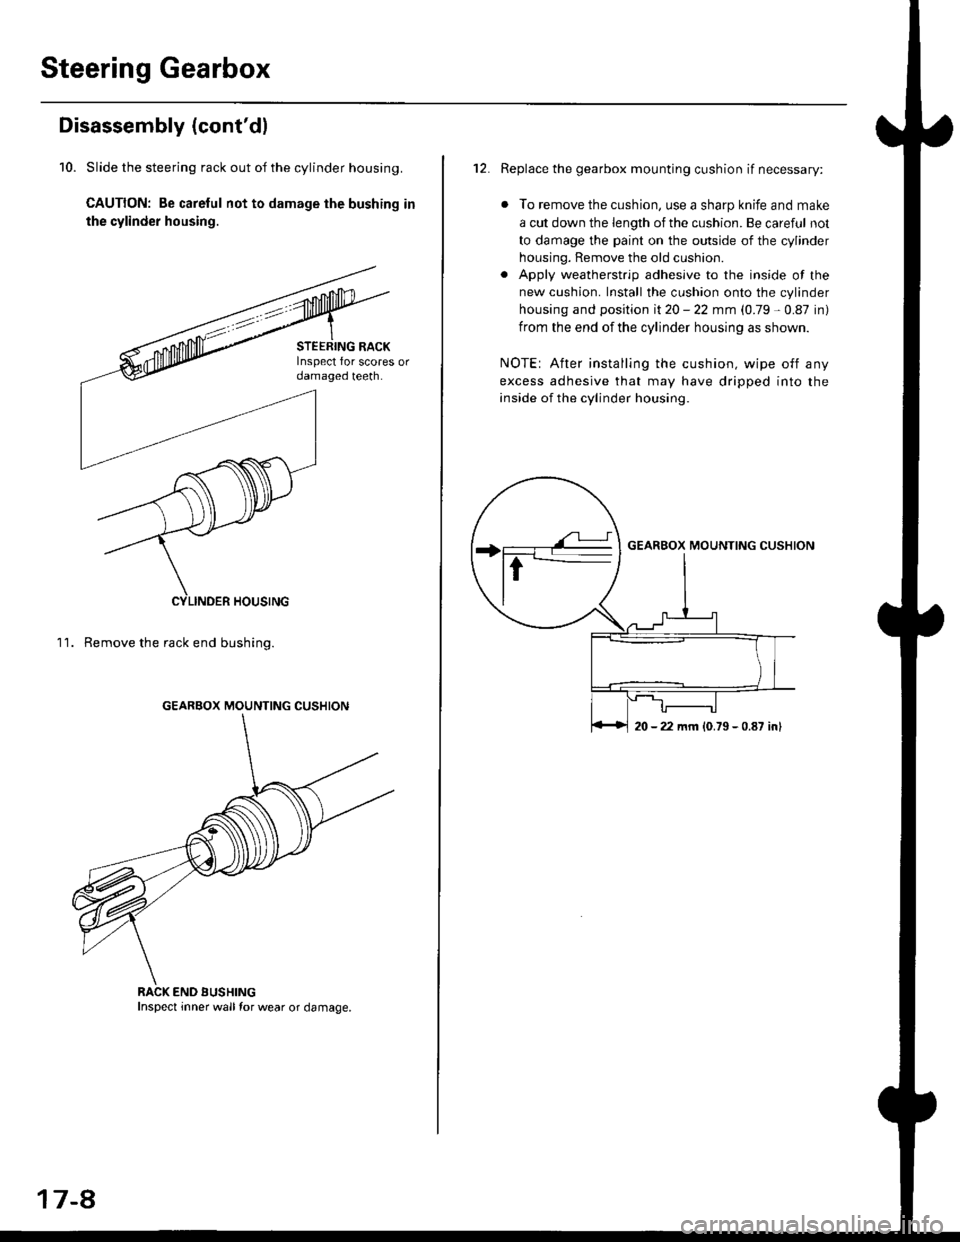 HONDA CIVIC 1996 6.G Workshop Manual Steering Gearbox
Disassembly (contdl
10. Slide the steering rack out of the cylinder housing.
CAUTION: Be carelul not to damage the bushing in
the cylinder housing.
11. Remove the rack end bushing.
G